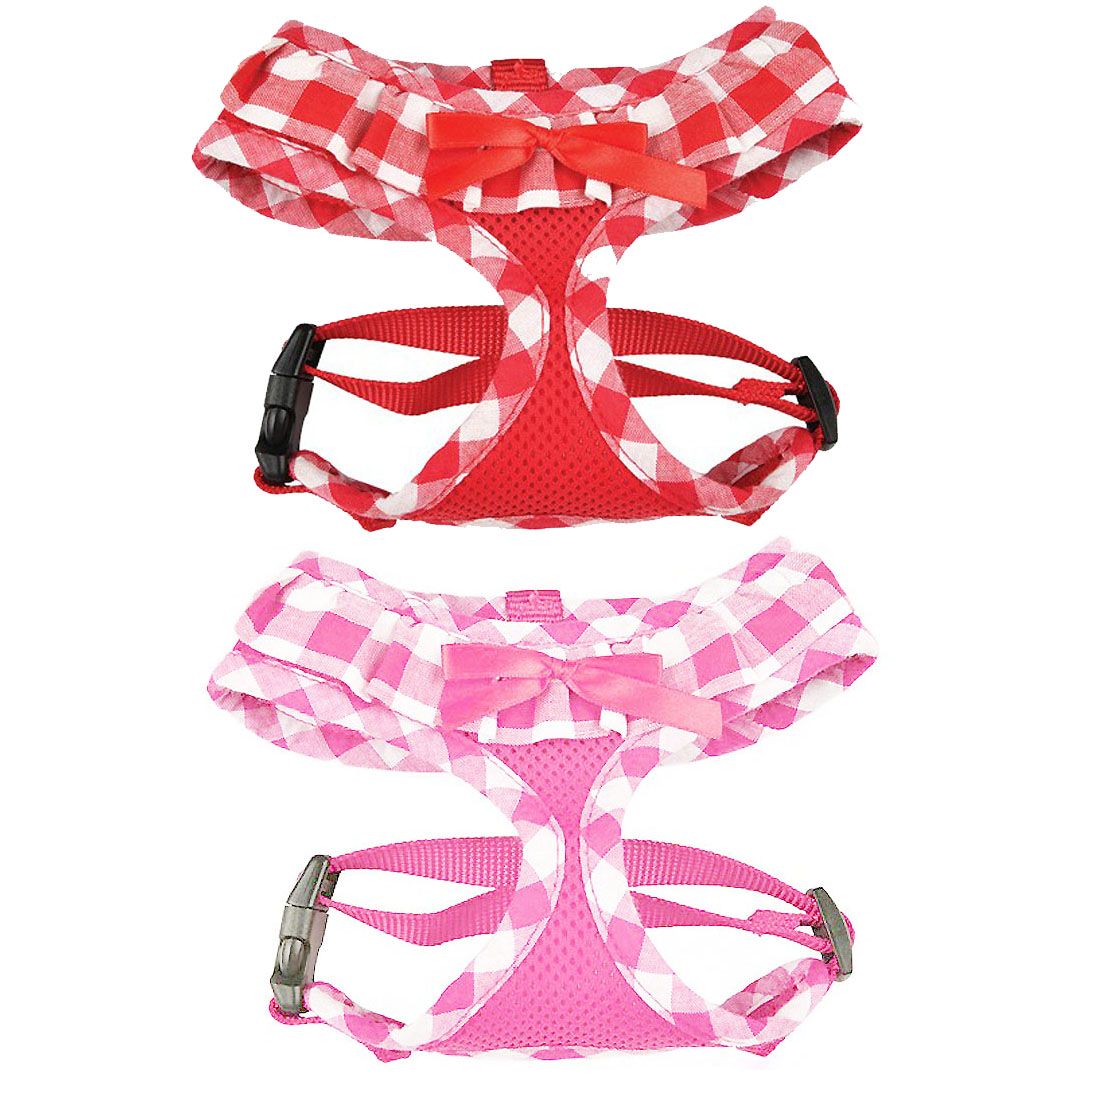 Harness for dog harness stars Red